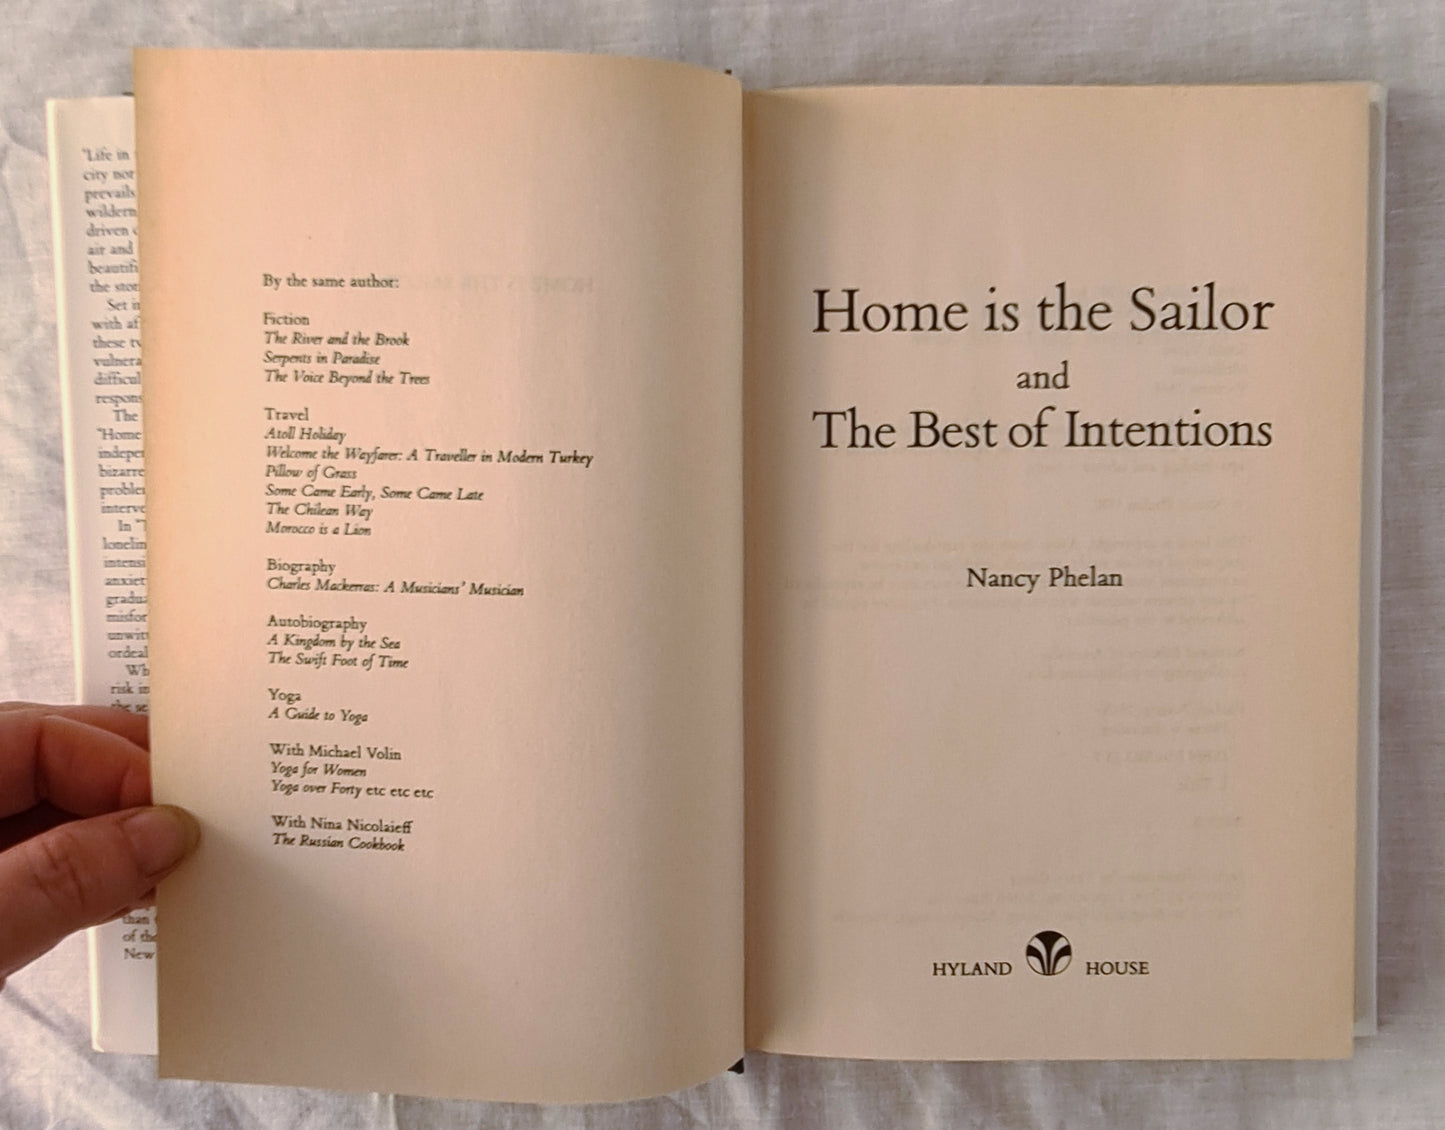 Home is the Sailor and The Best of Intentions by Nancy Phelan